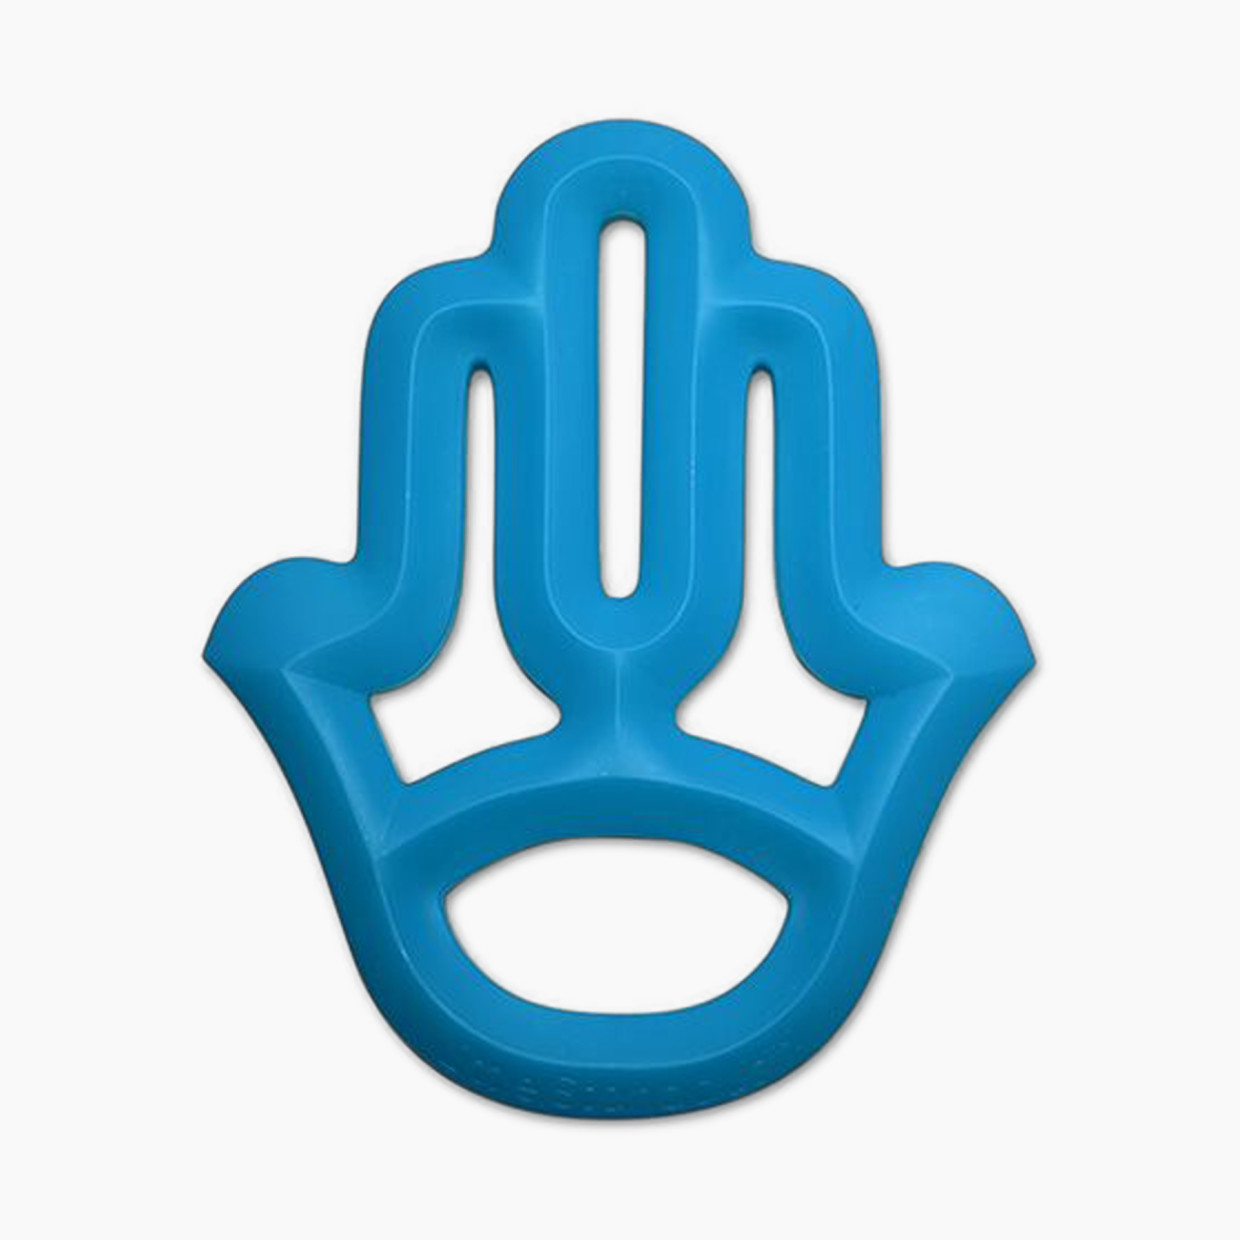 Little Standout Silicone Teether - Hand Blue.